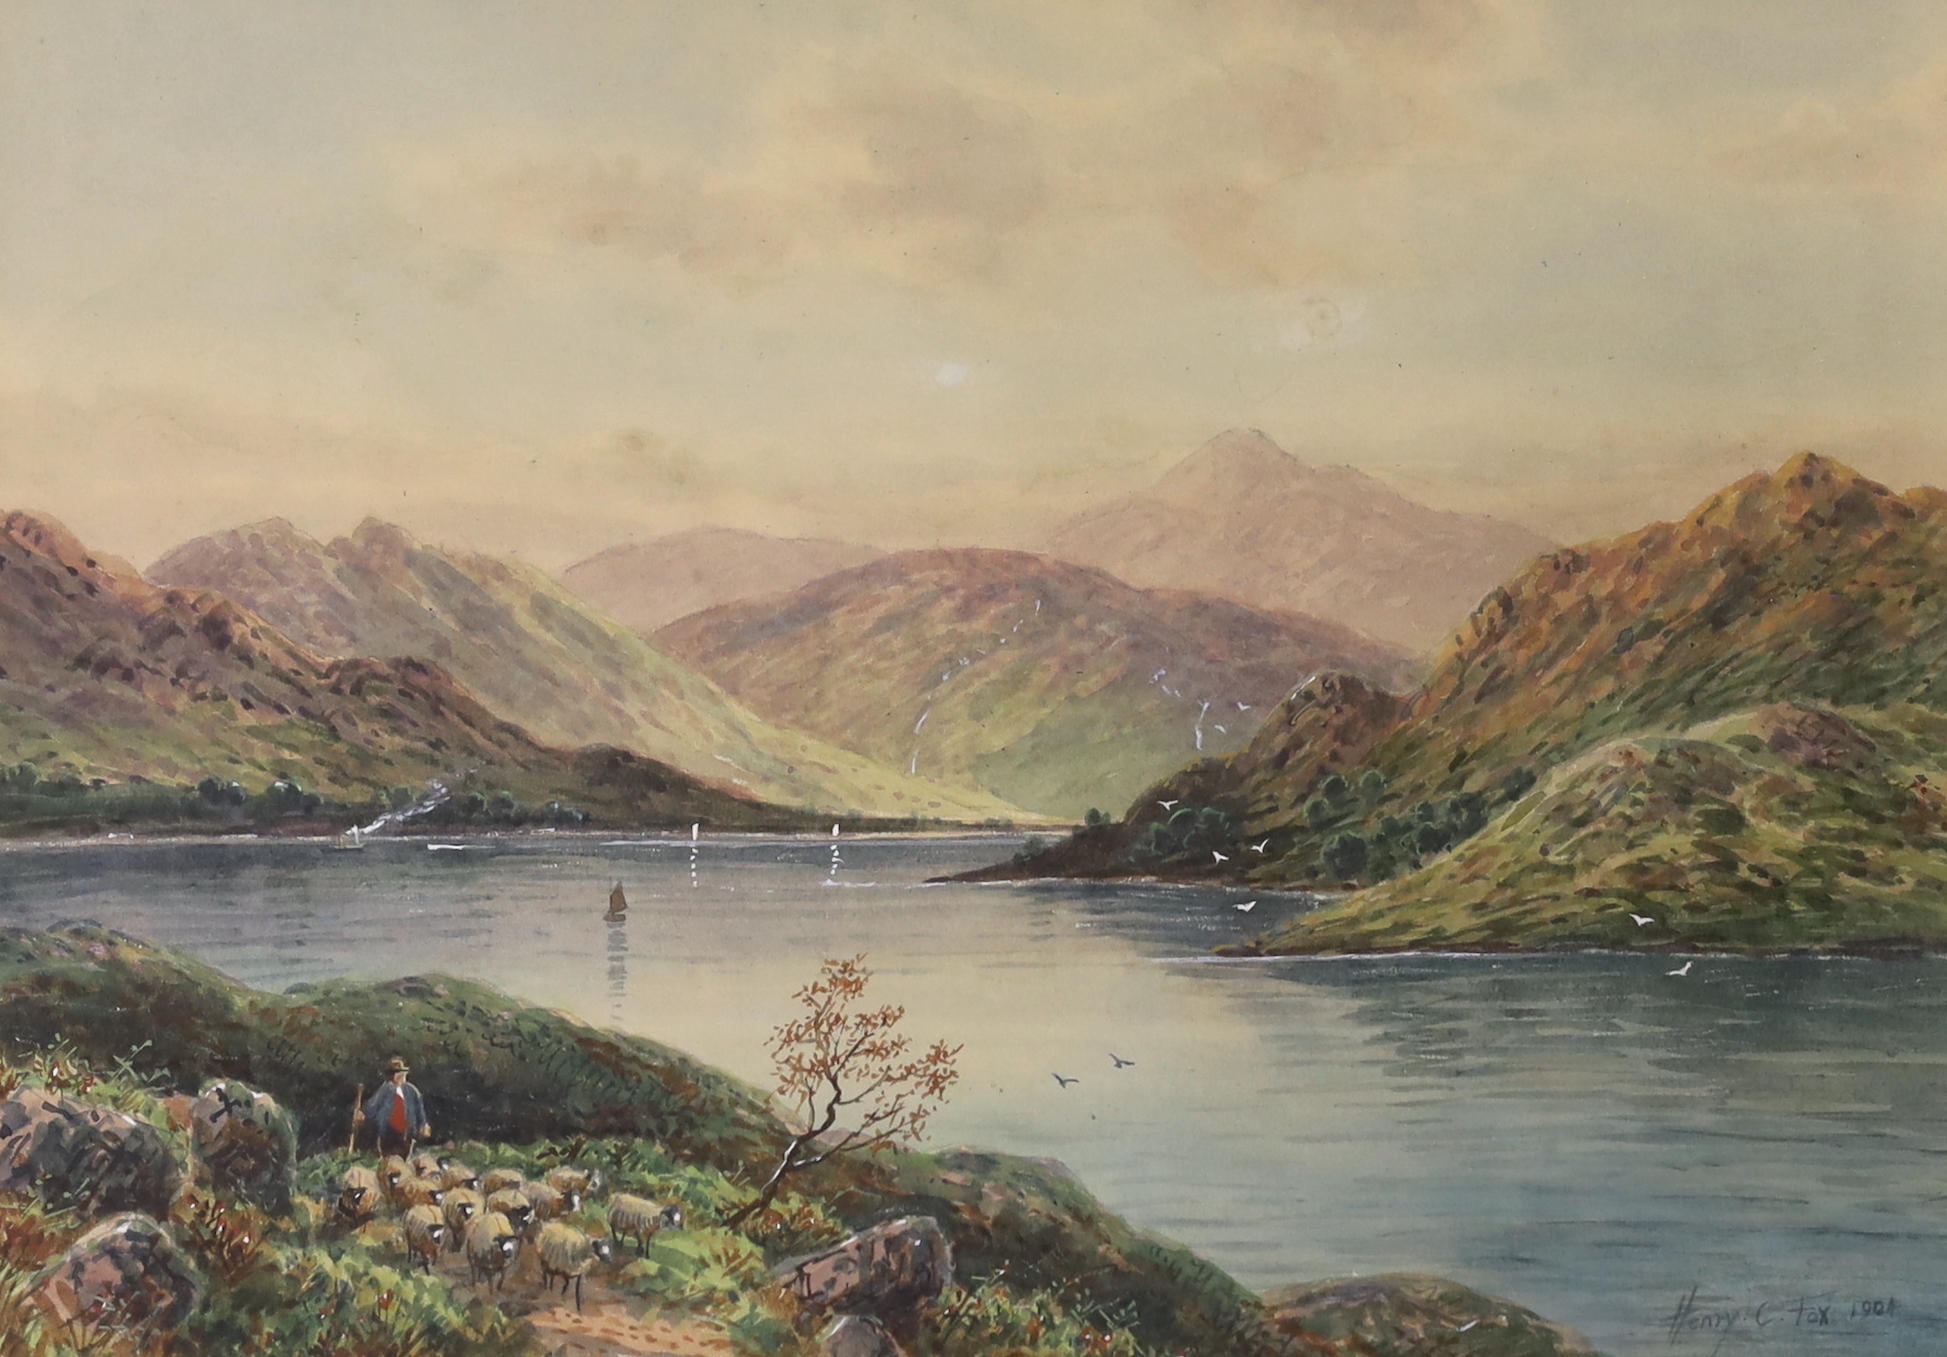 Henry Charles Fox (1860-1925), watercolour, 'Loch Gail', signed and dated 1904, 24 x 35cm